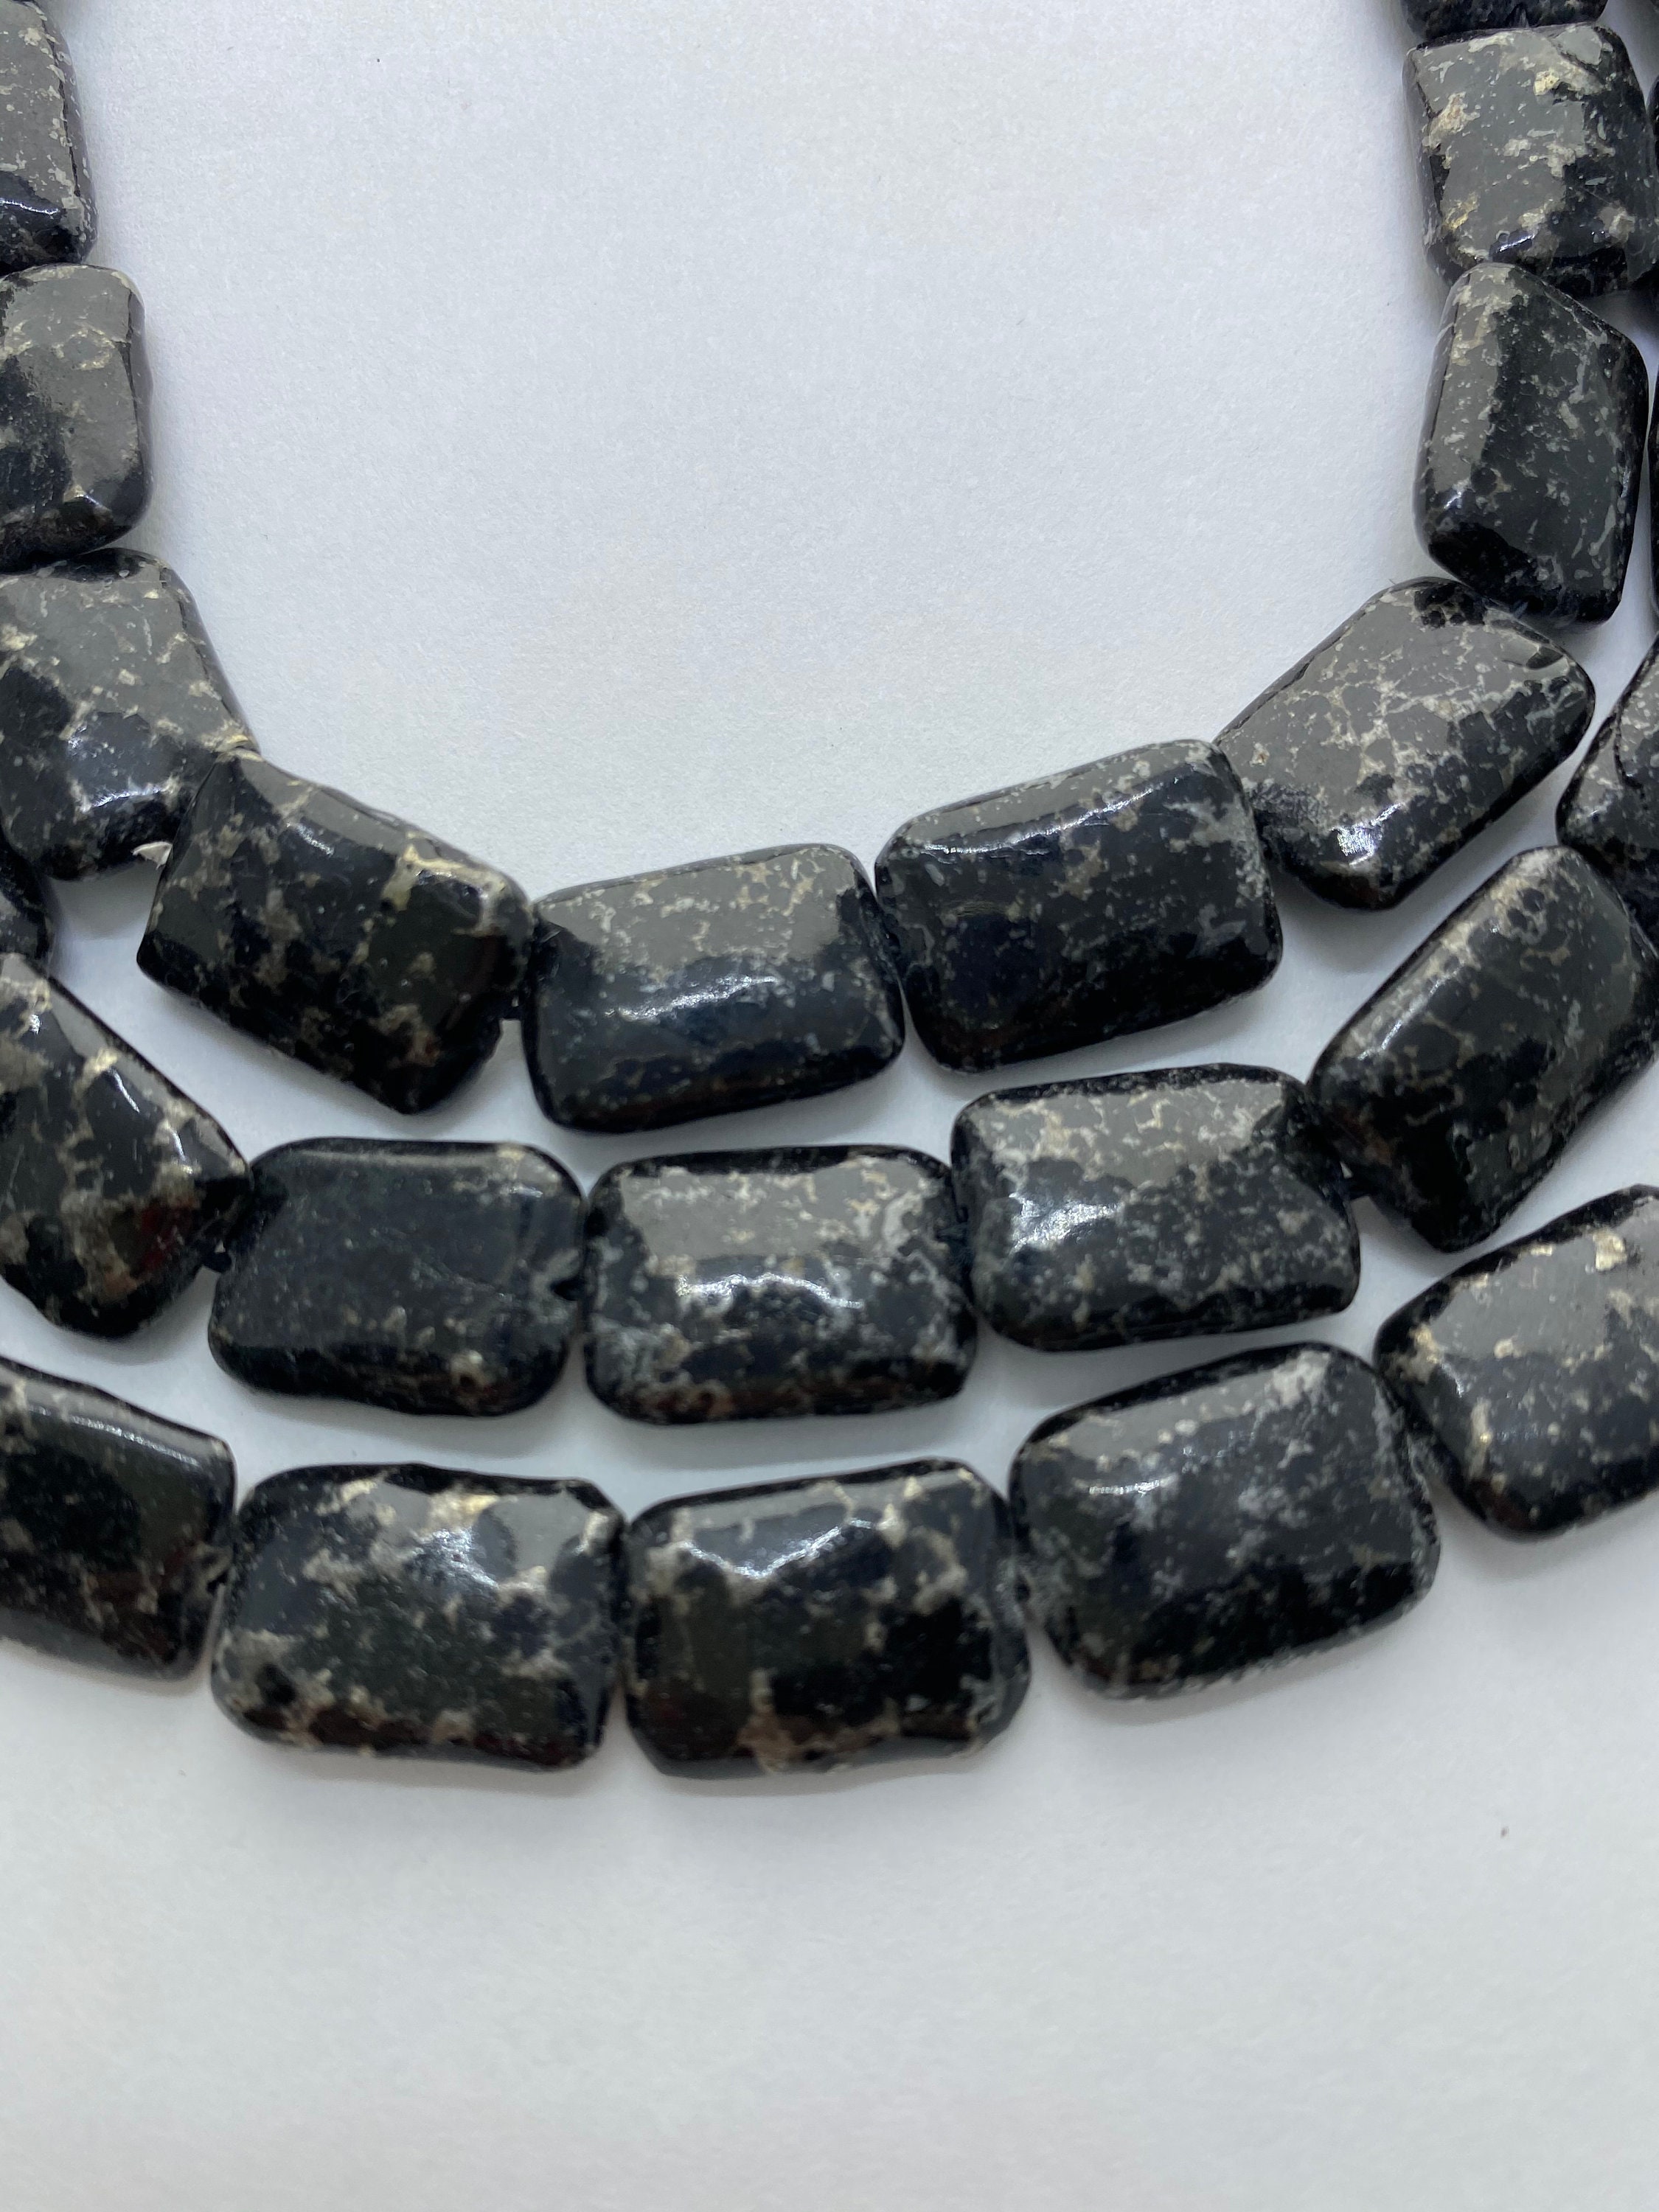 Bumpy Rare Black and Gold Astrophyllite Gemstone Beads. Full | Etsy